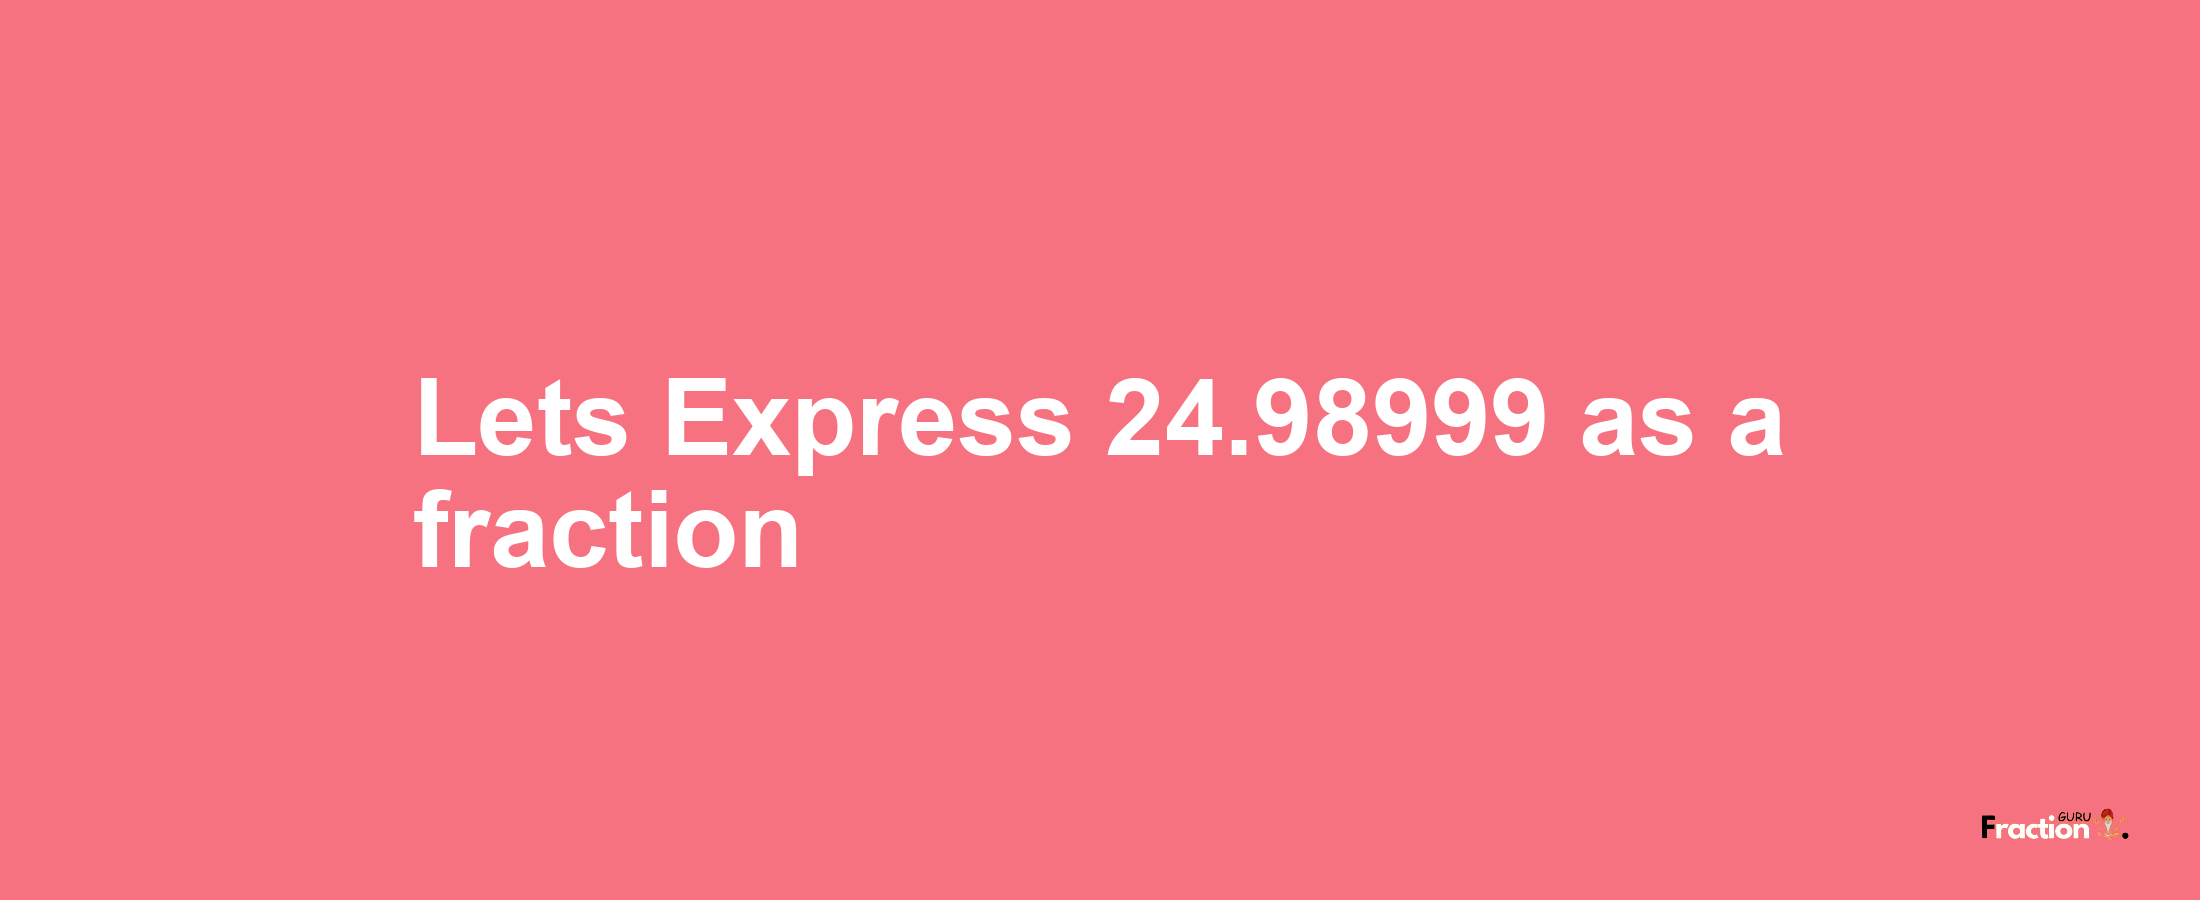 Lets Express 24.98999 as afraction